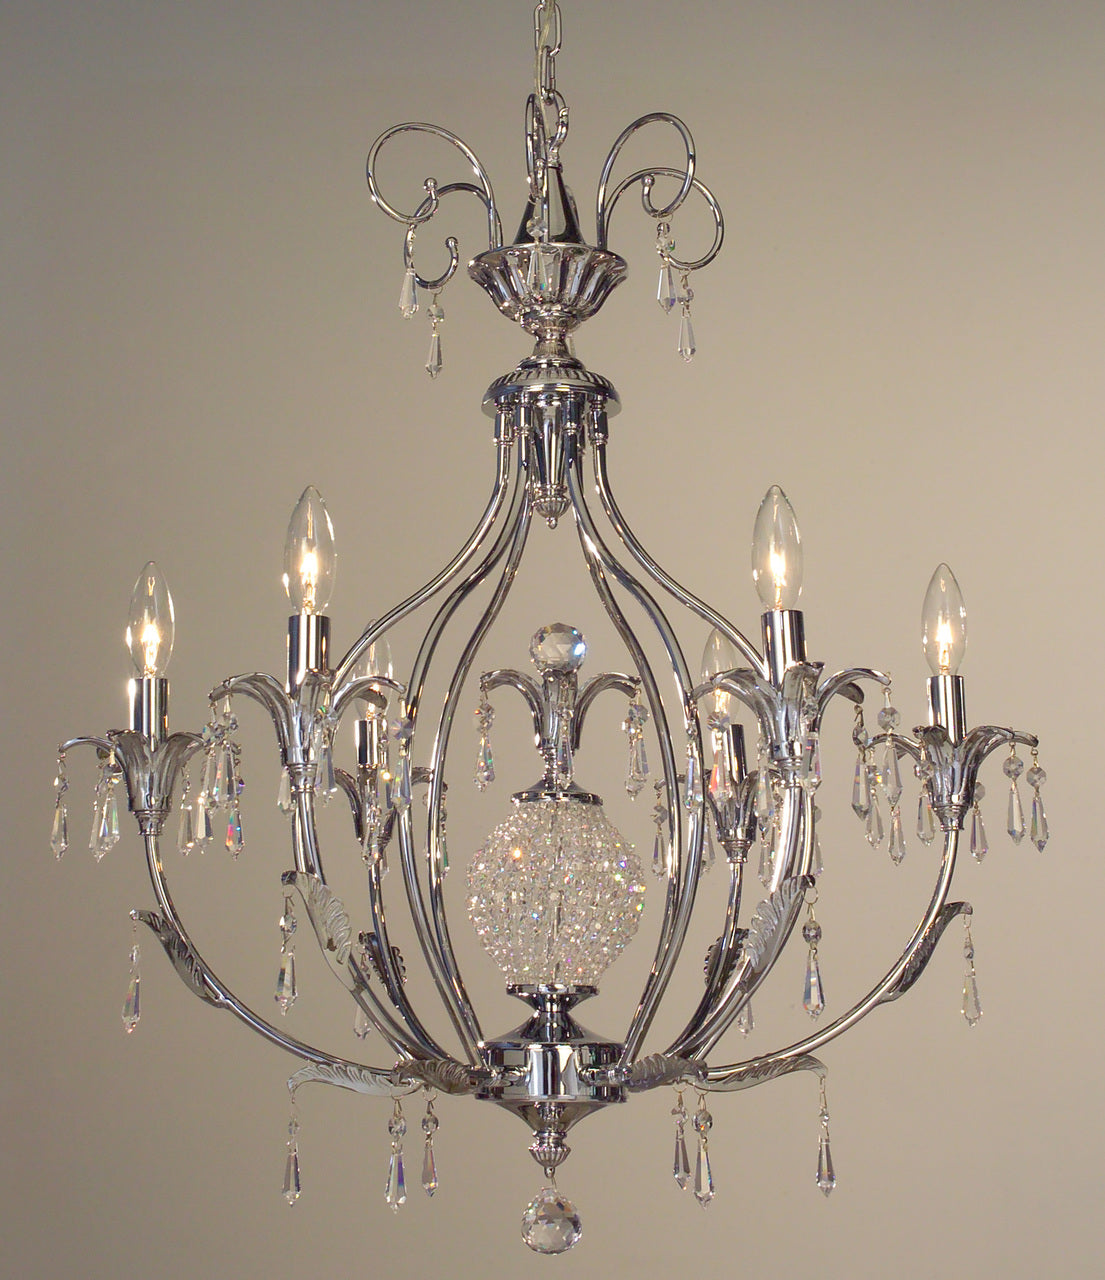 Classic Lighting 16116 CH SMK Sharon Crystal Chandelier in Chrome